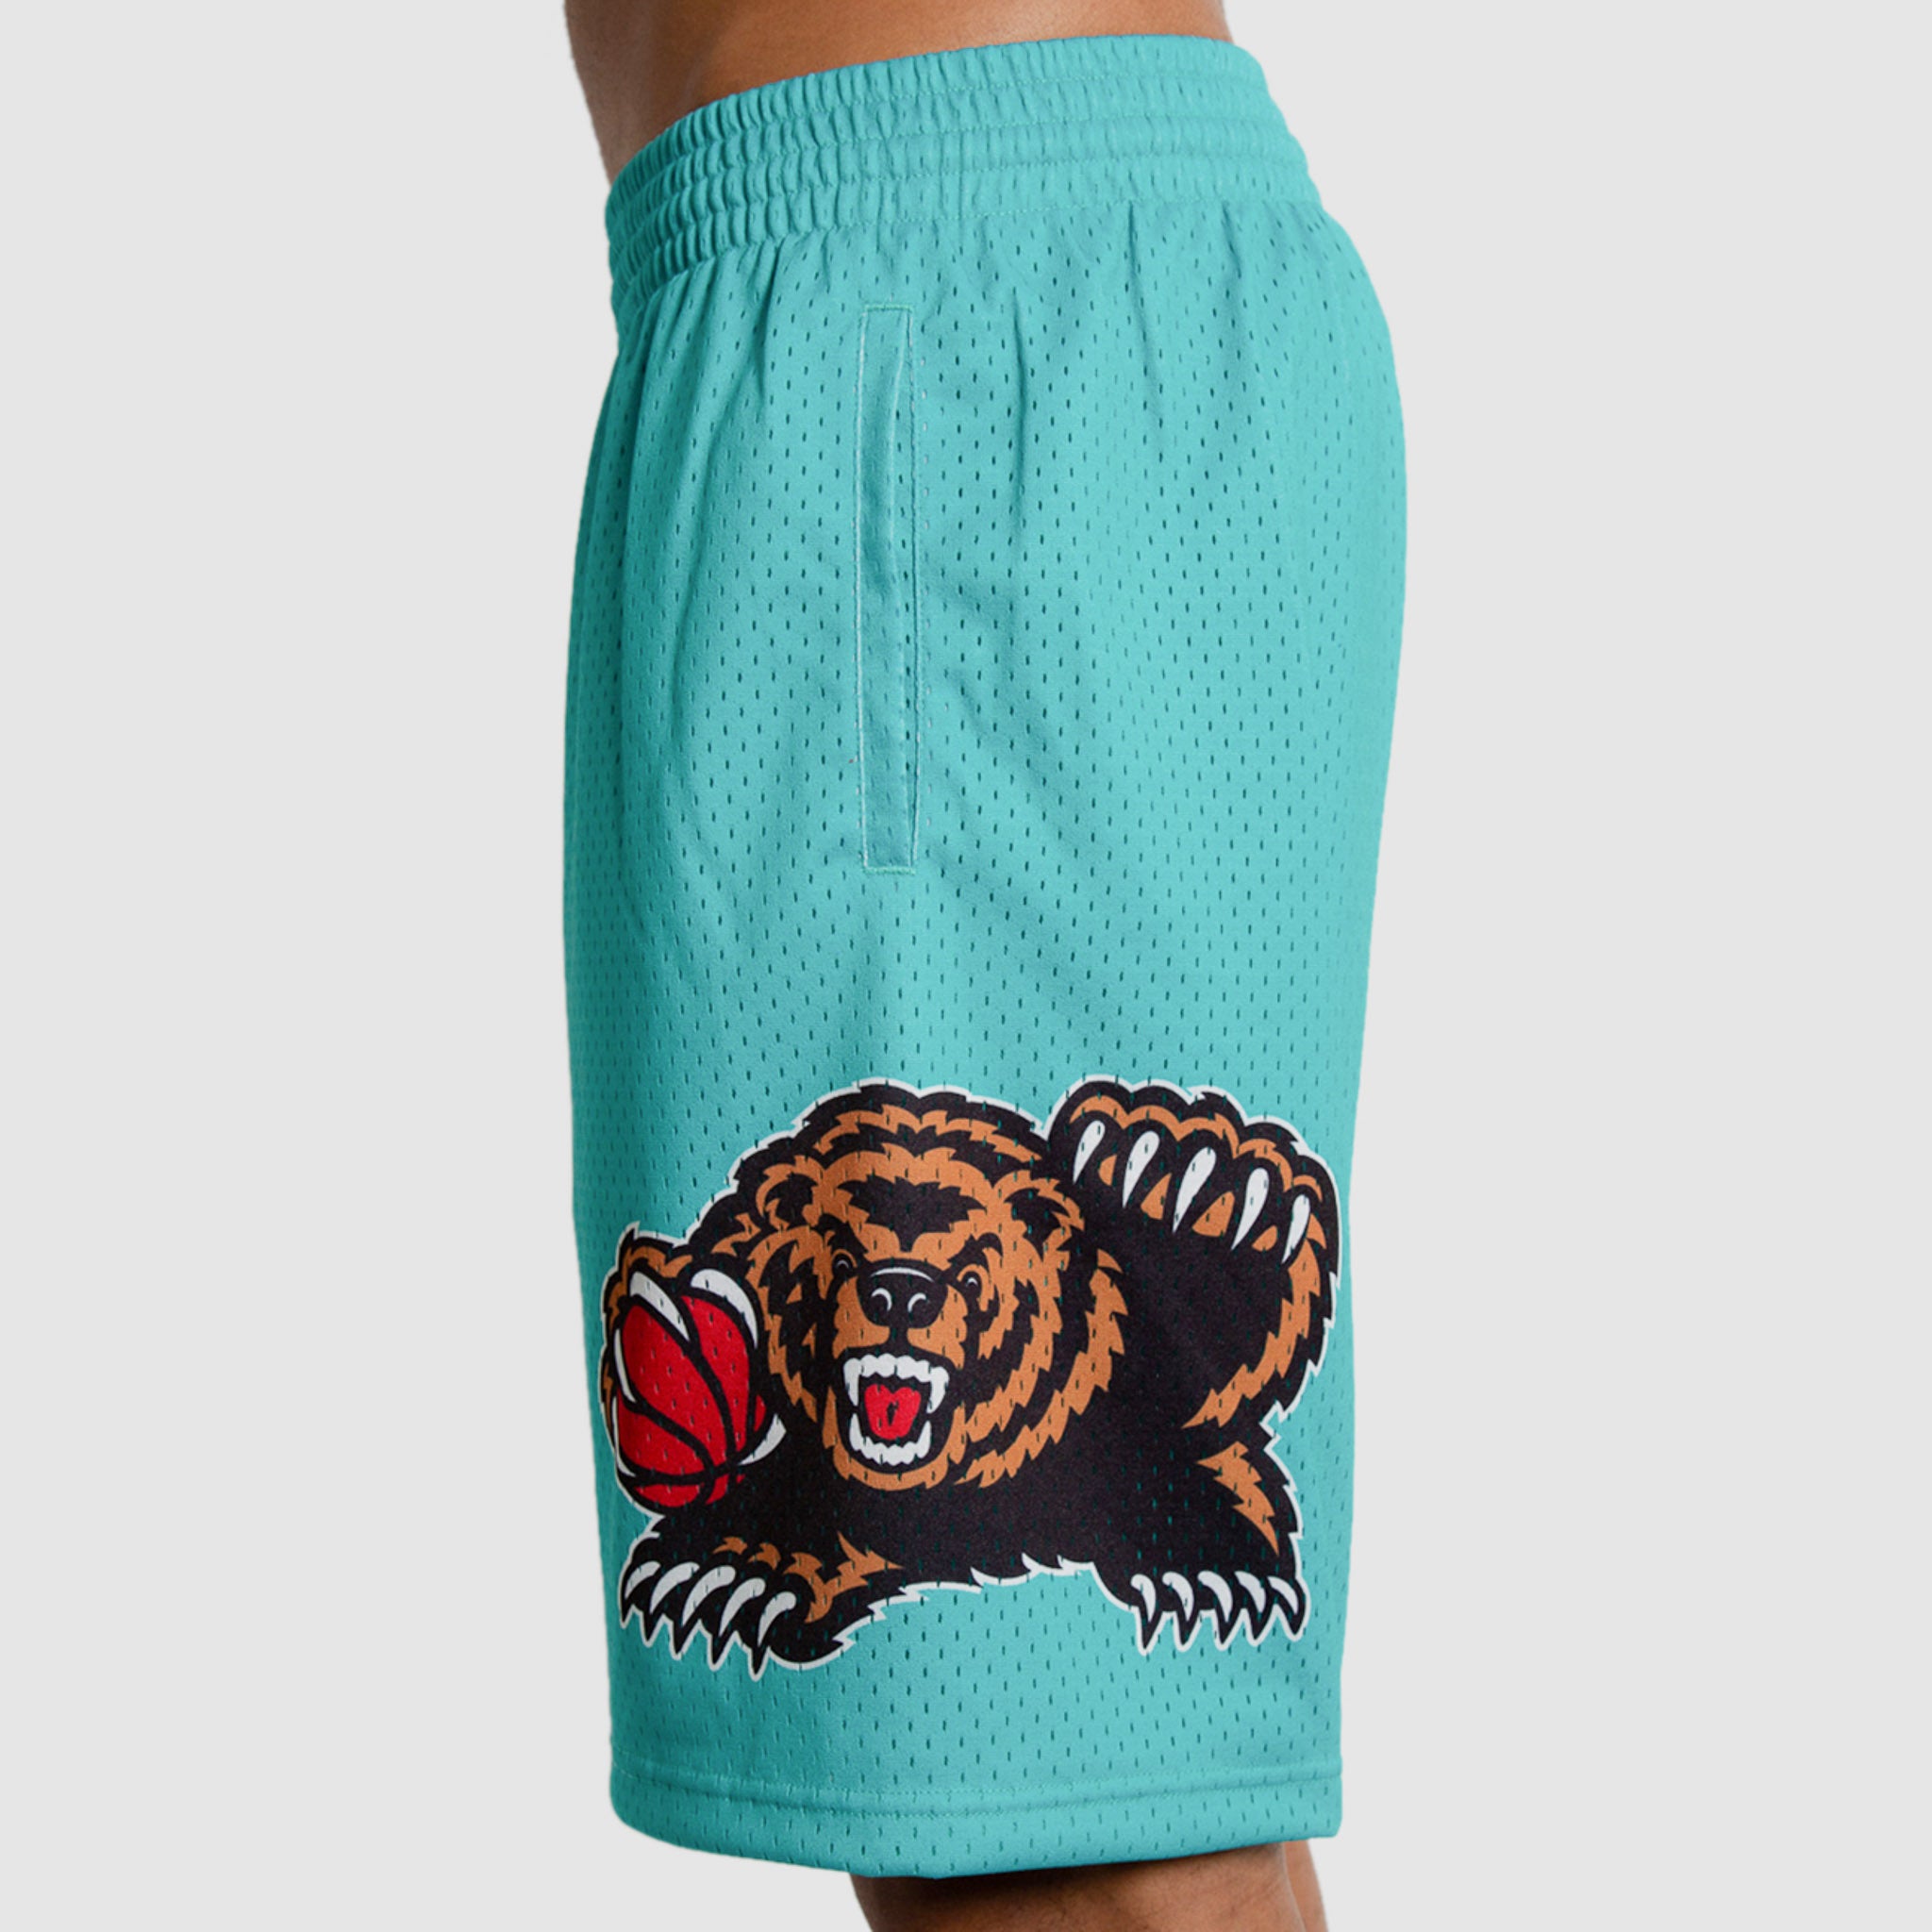 Vancouver Grizzles Shorts Teal - Basketball Shorts Store